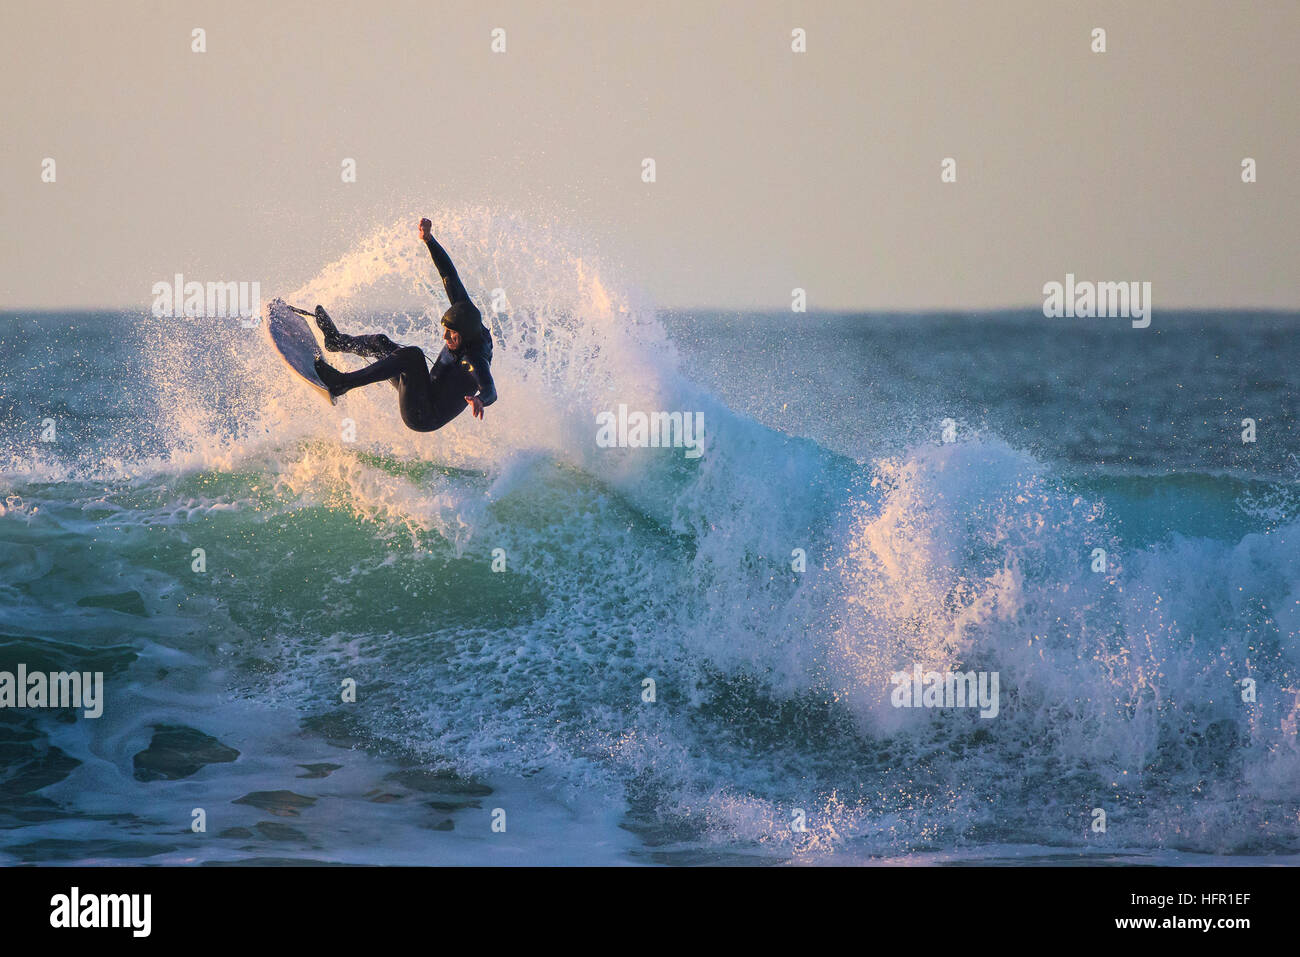 A surfer in spectacular action at Fistral in Newquay, Cornwall, England. UK. Stock Photo